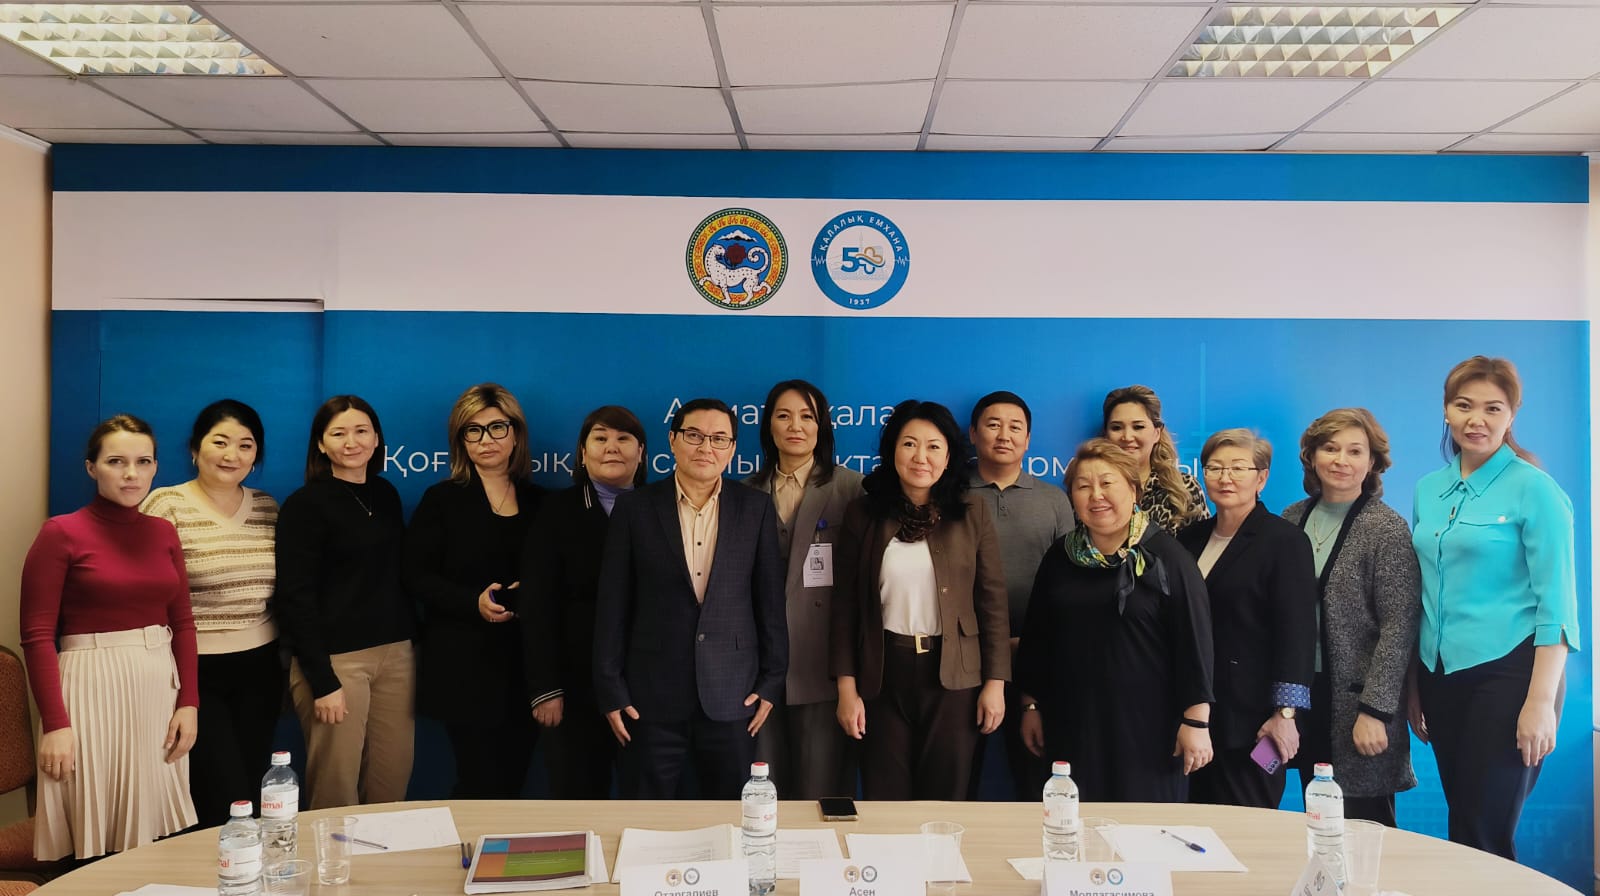 PRESS RELEASE  An orientation training on UPMP for PHC leaders in Almaty was held in Almaty